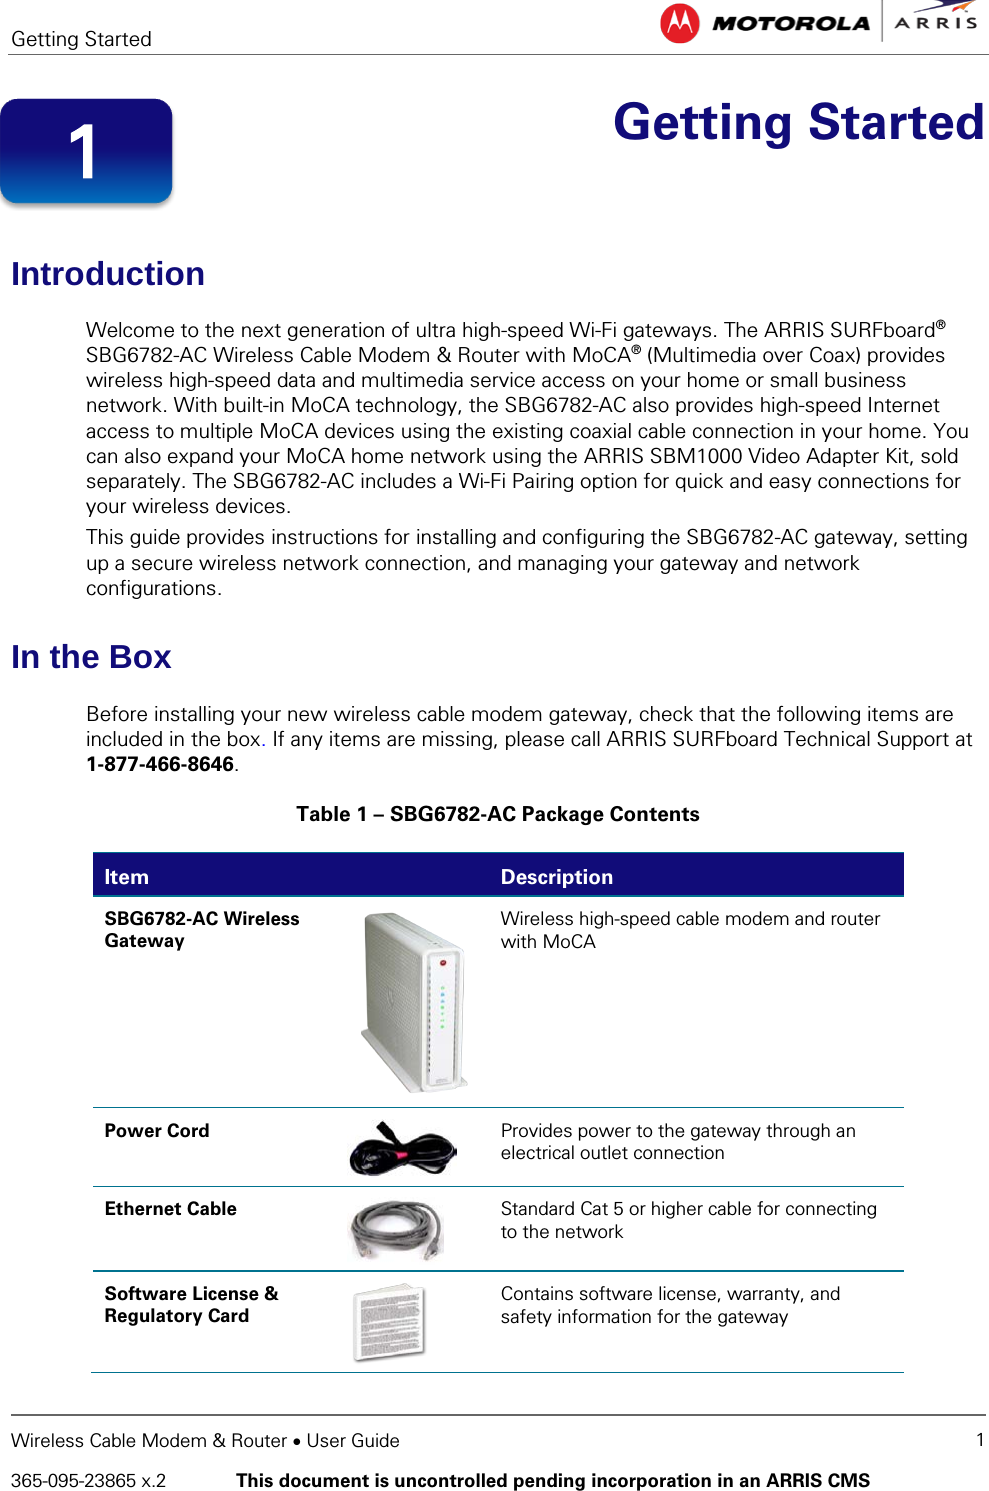 Getting Started   Wireless Cable Modem &amp; Router • User Guide 1 365-095-23865 x.2   This document is uncontrolled pending incorporation in an ARRIS CMS   Getting Started Introduction Welcome to the next generation of ultra high-speed Wi-Fi gateways. The ARRIS SURFboard® SBG6782-AC Wireless Cable Modem &amp; Router with MoCA® (Multimedia over Coax) provides wireless high-speed data and multimedia service access on your home or small business network. With built-in MoCA technology, the SBG6782-AC also provides high-speed Internet access to multiple MoCA devices using the existing coaxial cable connection in your home. You can also expand your MoCA home network using the ARRIS SBM1000 Video Adapter Kit, sold separately. The SBG6782-AC includes a Wi-Fi Pairing option for quick and easy connections for your wireless devices. This guide provides instructions for installing and configuring the SBG6782-AC gateway, setting up a secure wireless network connection, and managing your gateway and network configurations. In the Box Before installing your new wireless cable modem gateway, check that the following items are included in the box. If any items are missing, please call ARRIS SURFboard Technical Support at 1-877-466-8646. Table 1 – SBG6782-AC Package Contents Item  Description SBG6782-AC Wireless  Gateway  Wireless high-speed cable modem and router with MoCA  Power Cord  Provides power to the gateway through an electrical outlet connection Ethernet Cable  Standard Cat 5 or higher cable for connecting to the network Software License &amp; Regulatory Card  Contains software license, warranty, and safety information for the gateway 1 